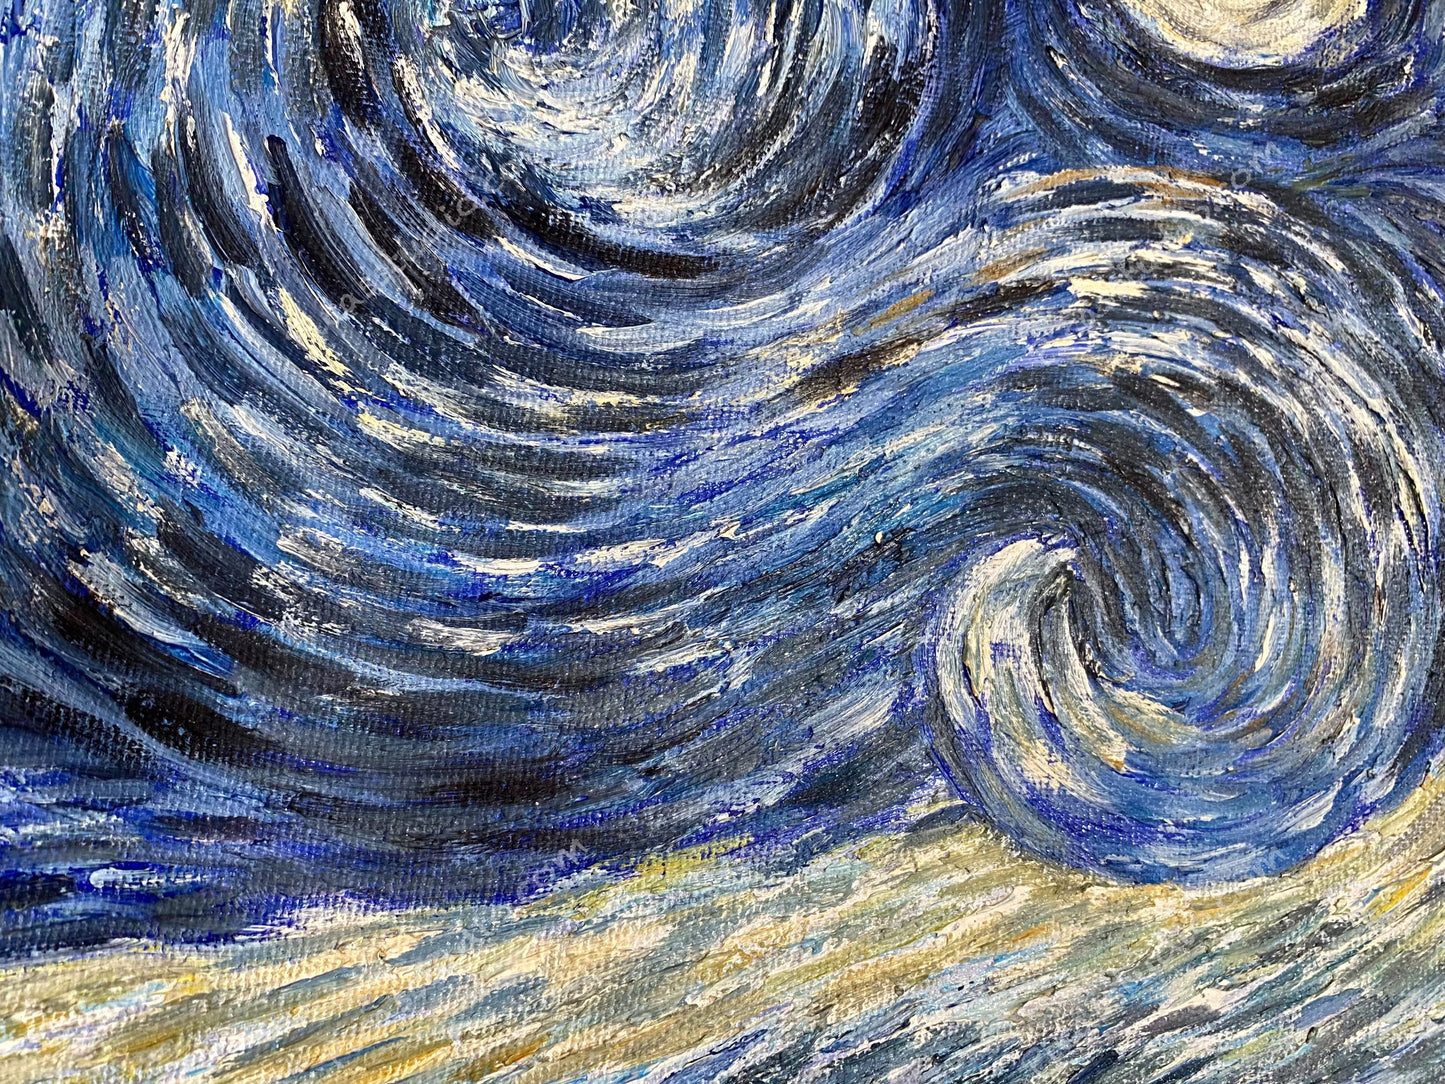 The Starry Night Painting by Vincent van Gogh Oil Painting Hand Painted Art on Canvas Wall Decor Unframed